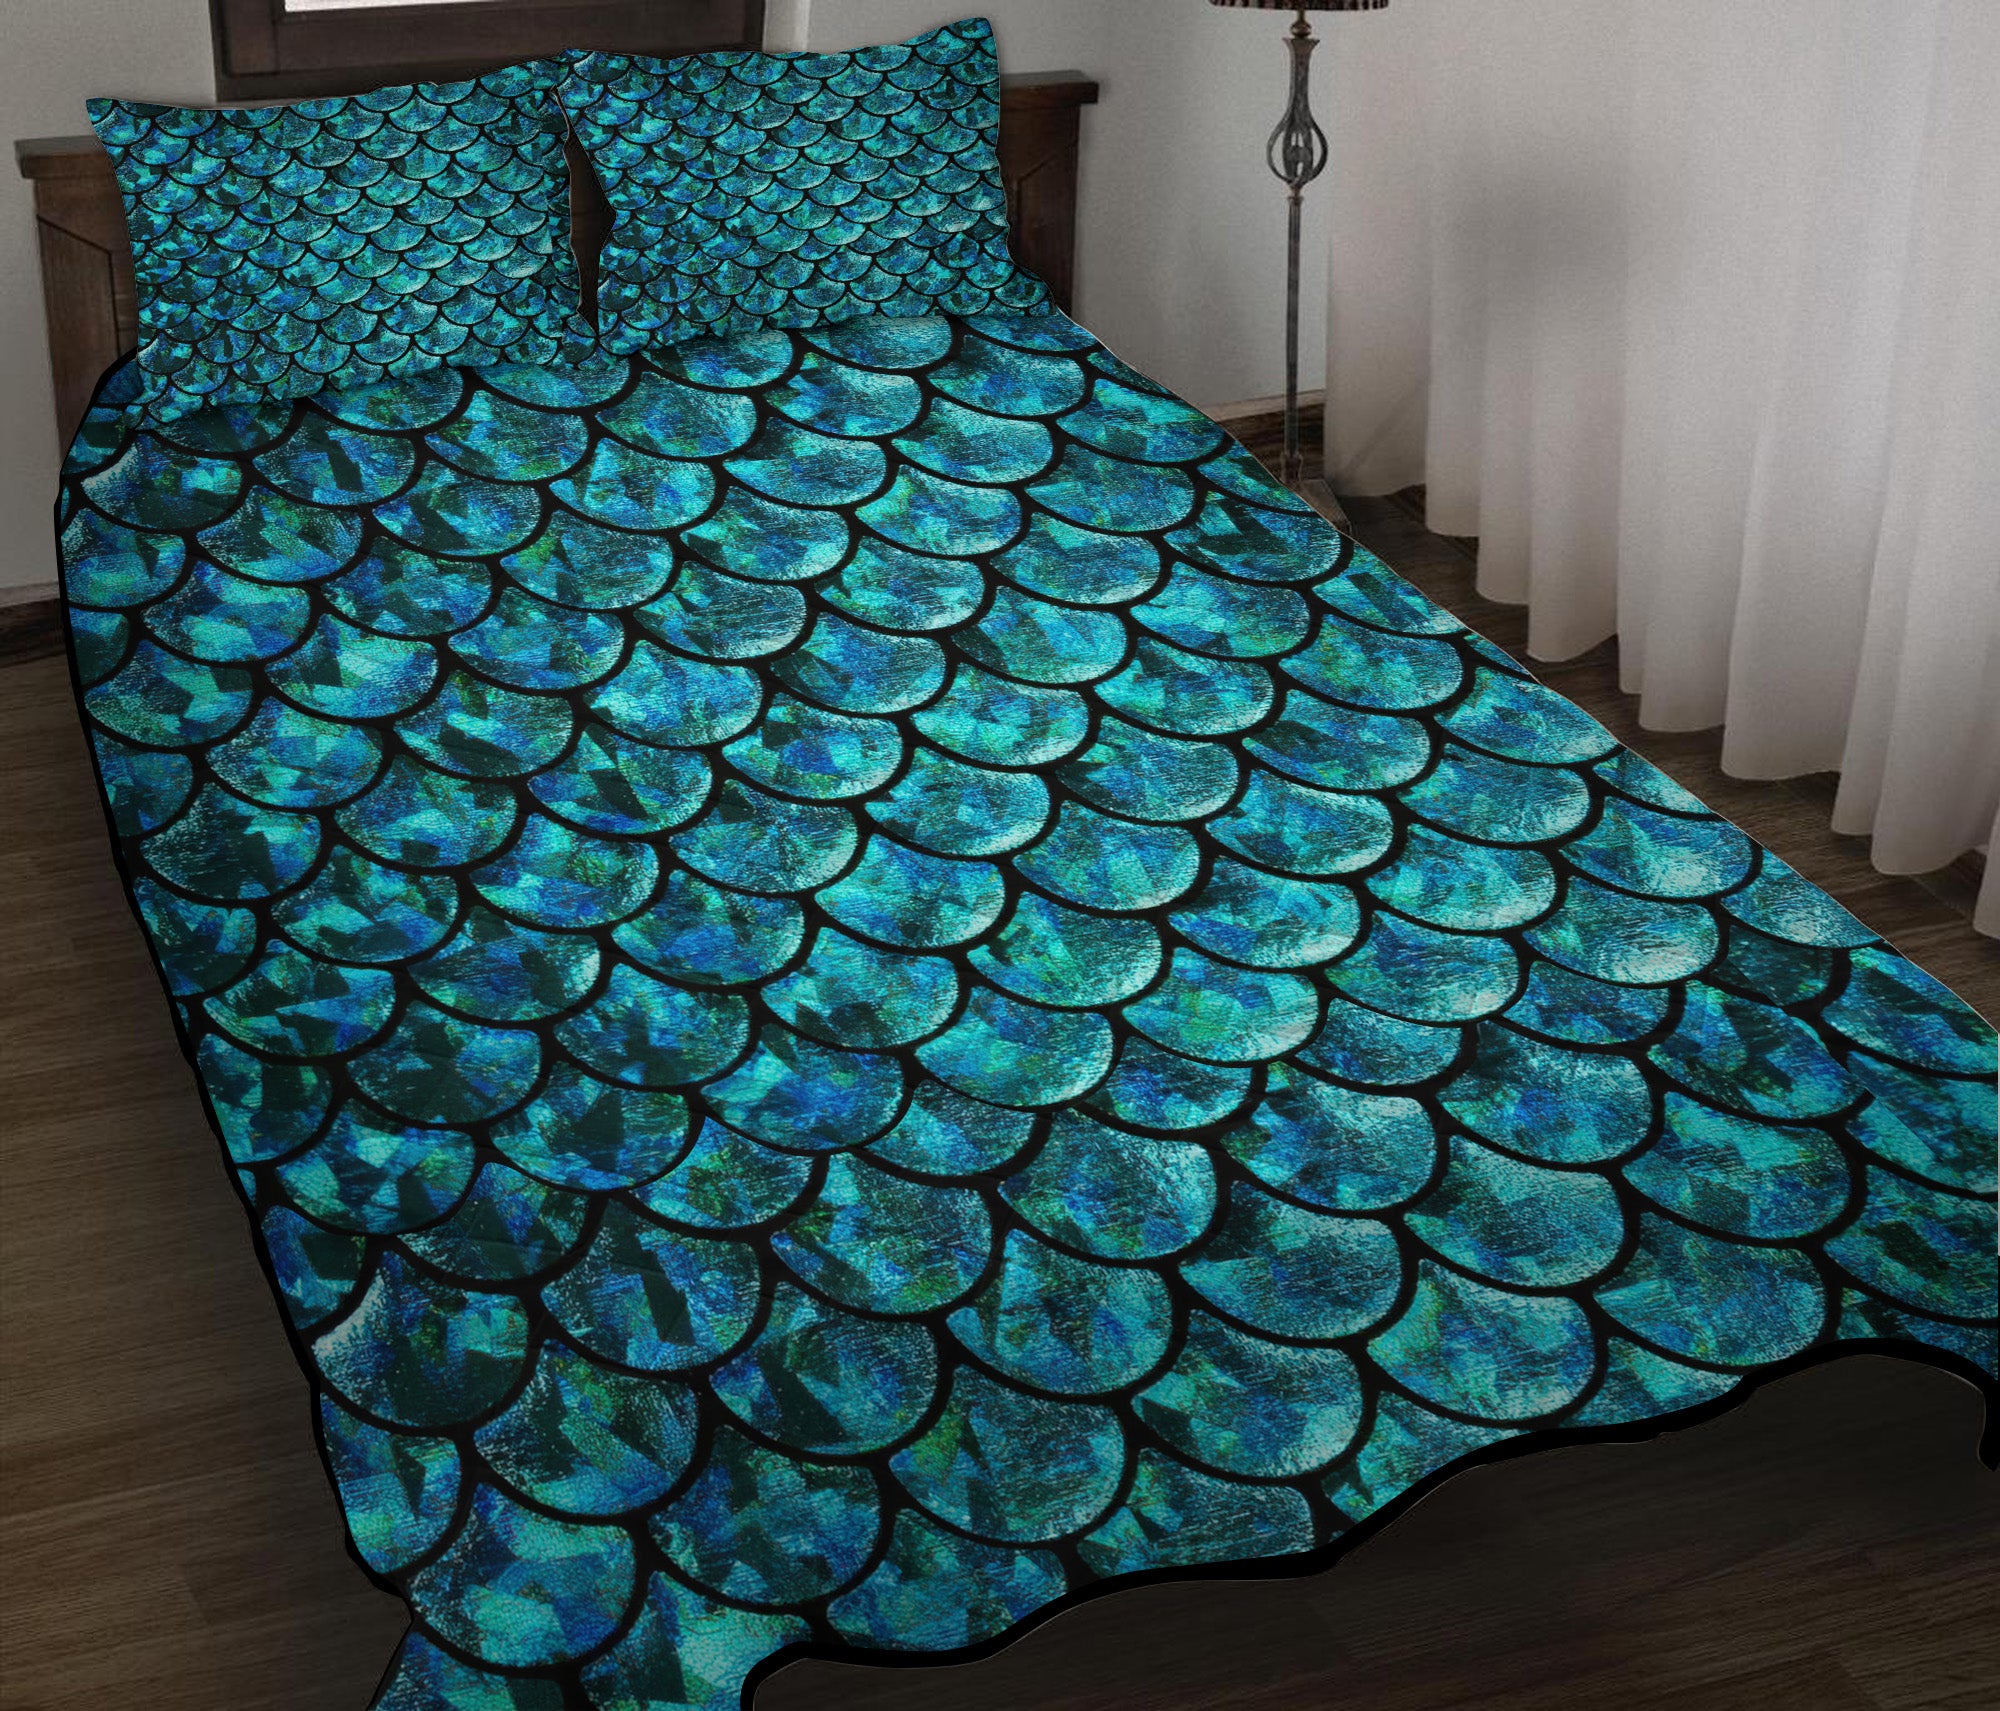 Mermaid Blue Quilt Bed Sets Nearkii